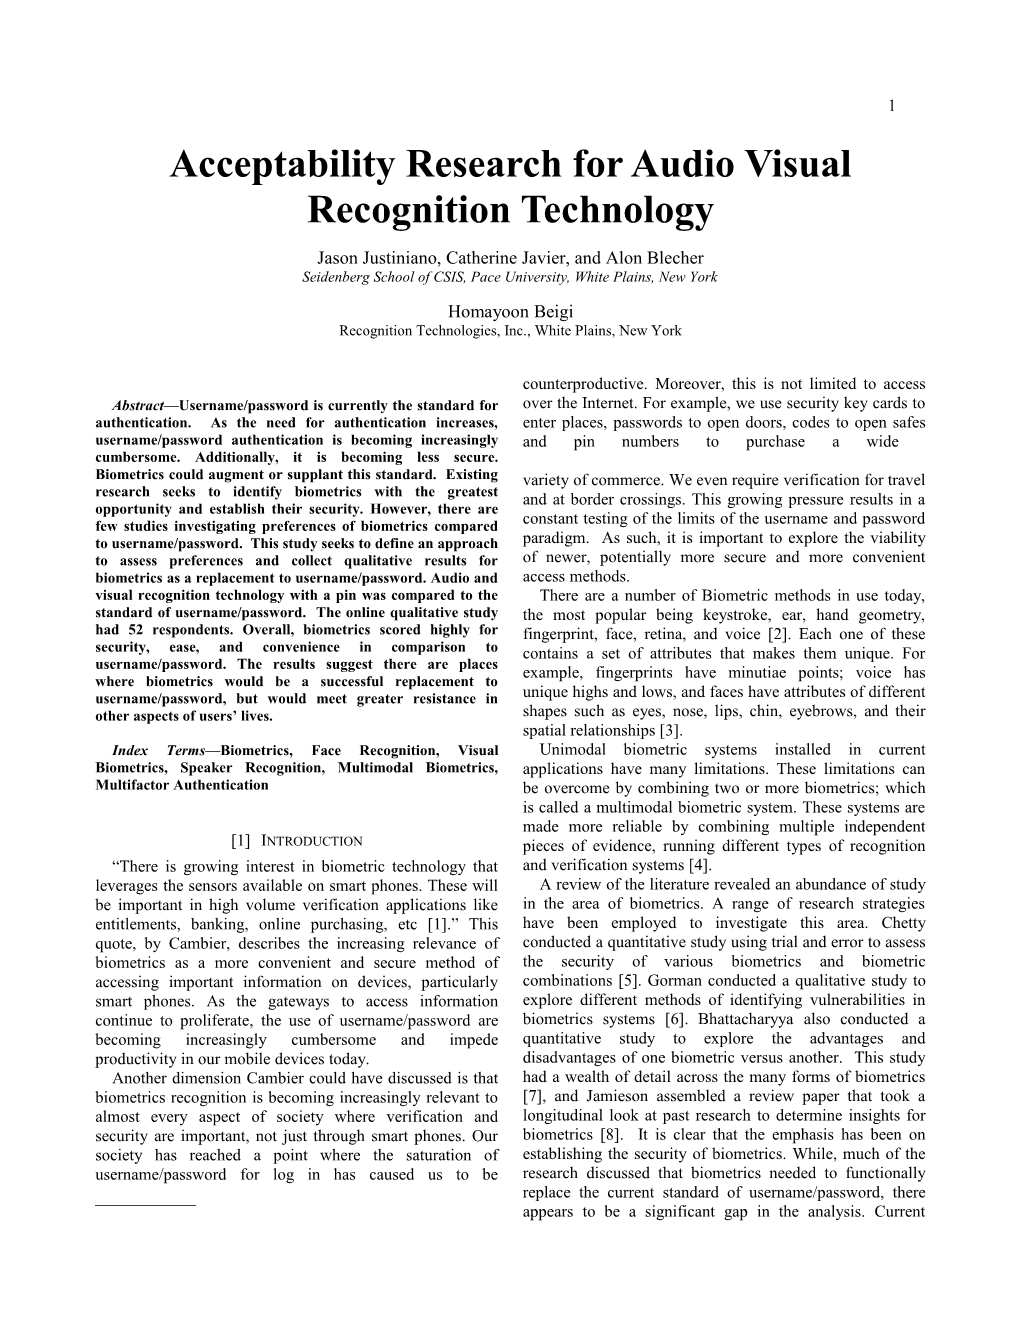 Acceptability Research for Audio Visual Recognition Technology